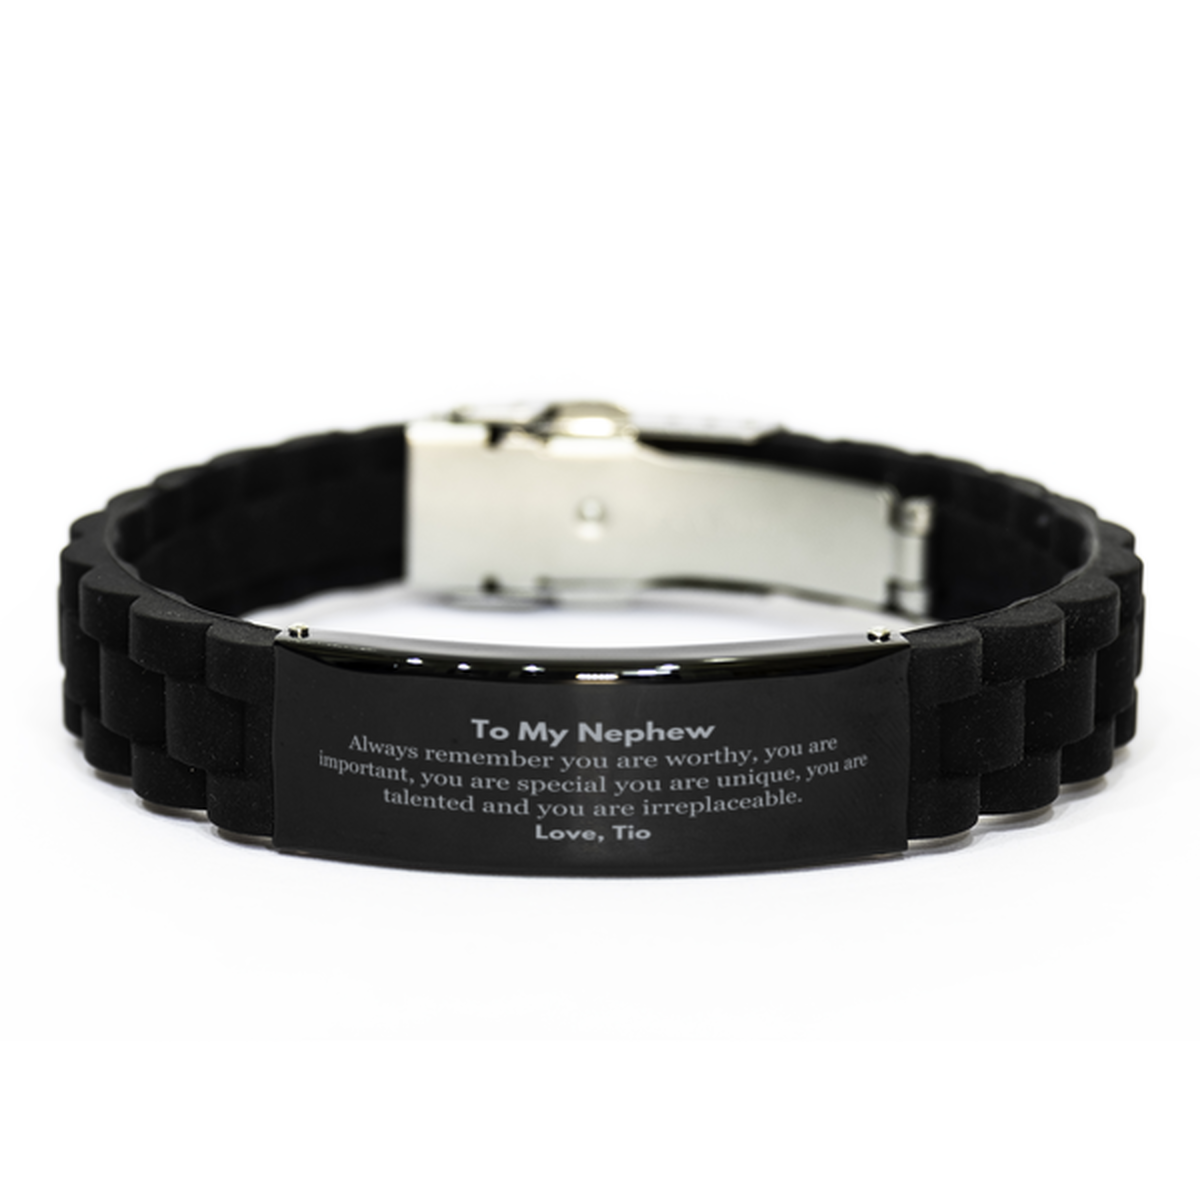 Nephew Birthday Gifts from Tio, Inspirational Black Glidelock Clasp Bracelet for Nephew Christmas Graduation Gifts for Nephew Always remember you are worthy, you are important. Love, Tio